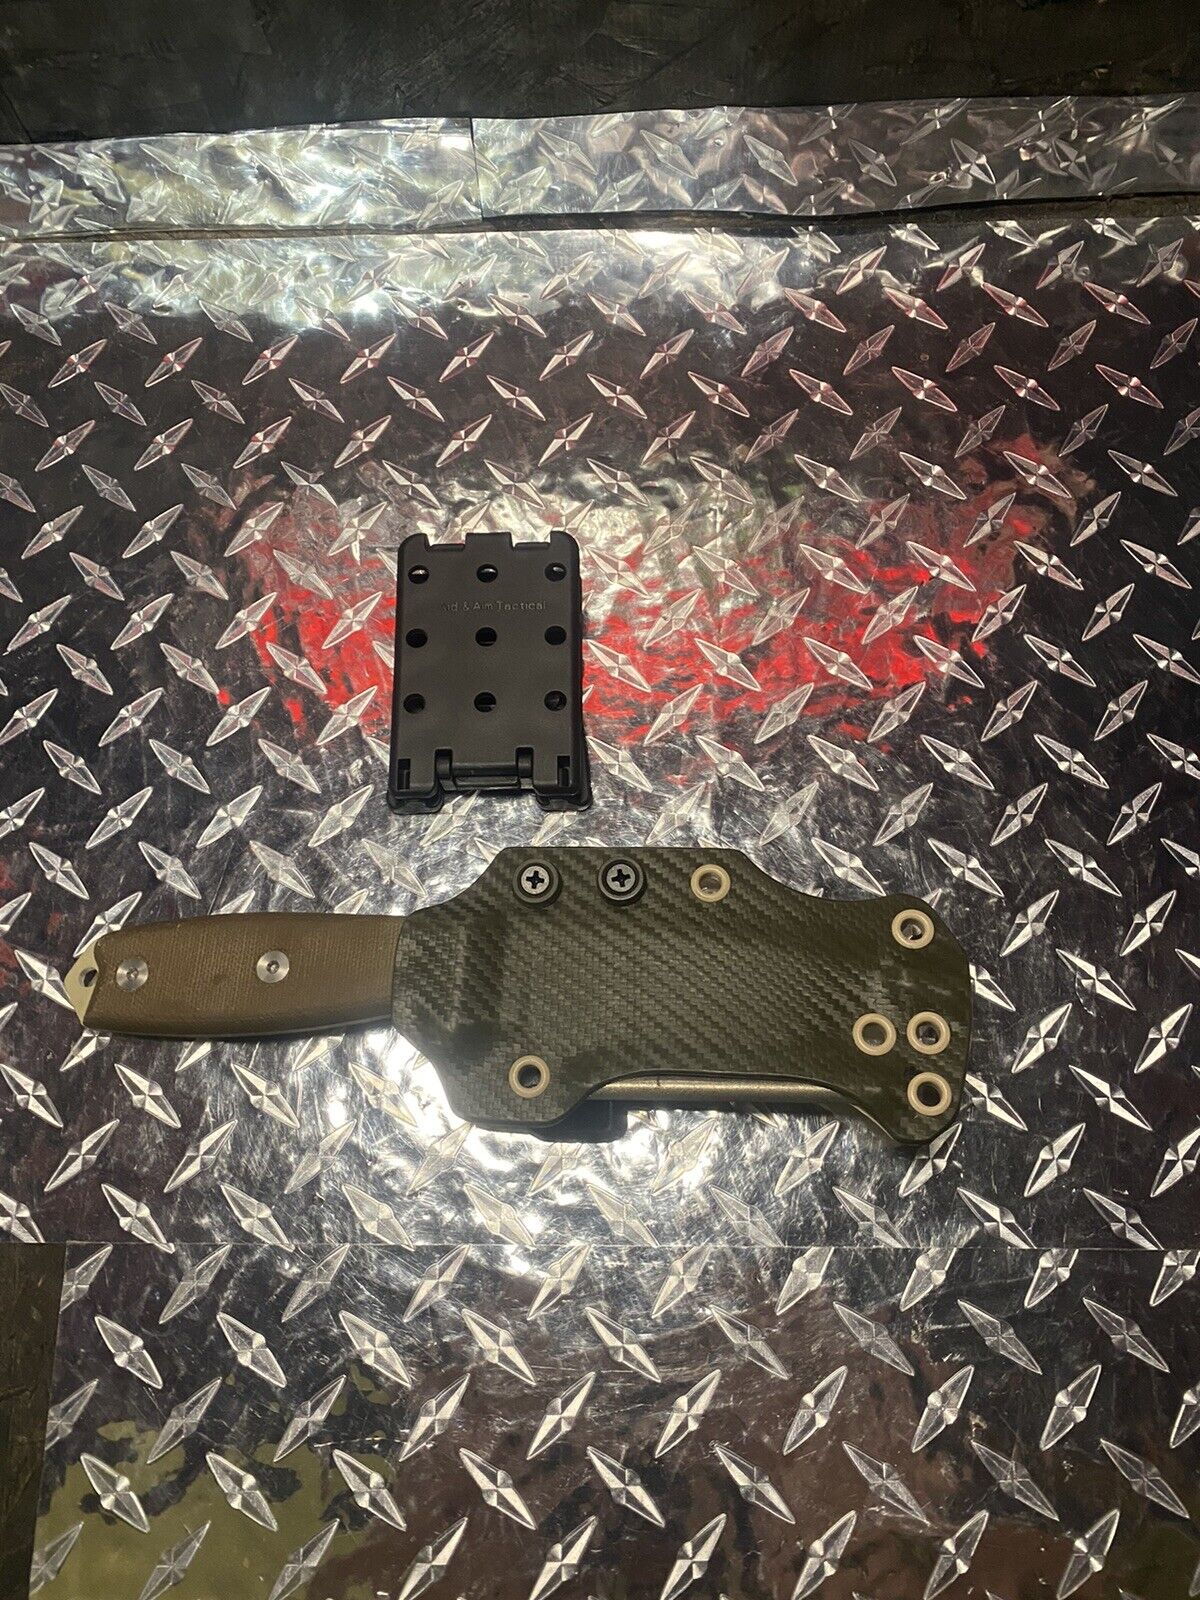 ESEE 3 Scout carry Kydex Sheath W/ 400grit diamond rod(knife not included) 